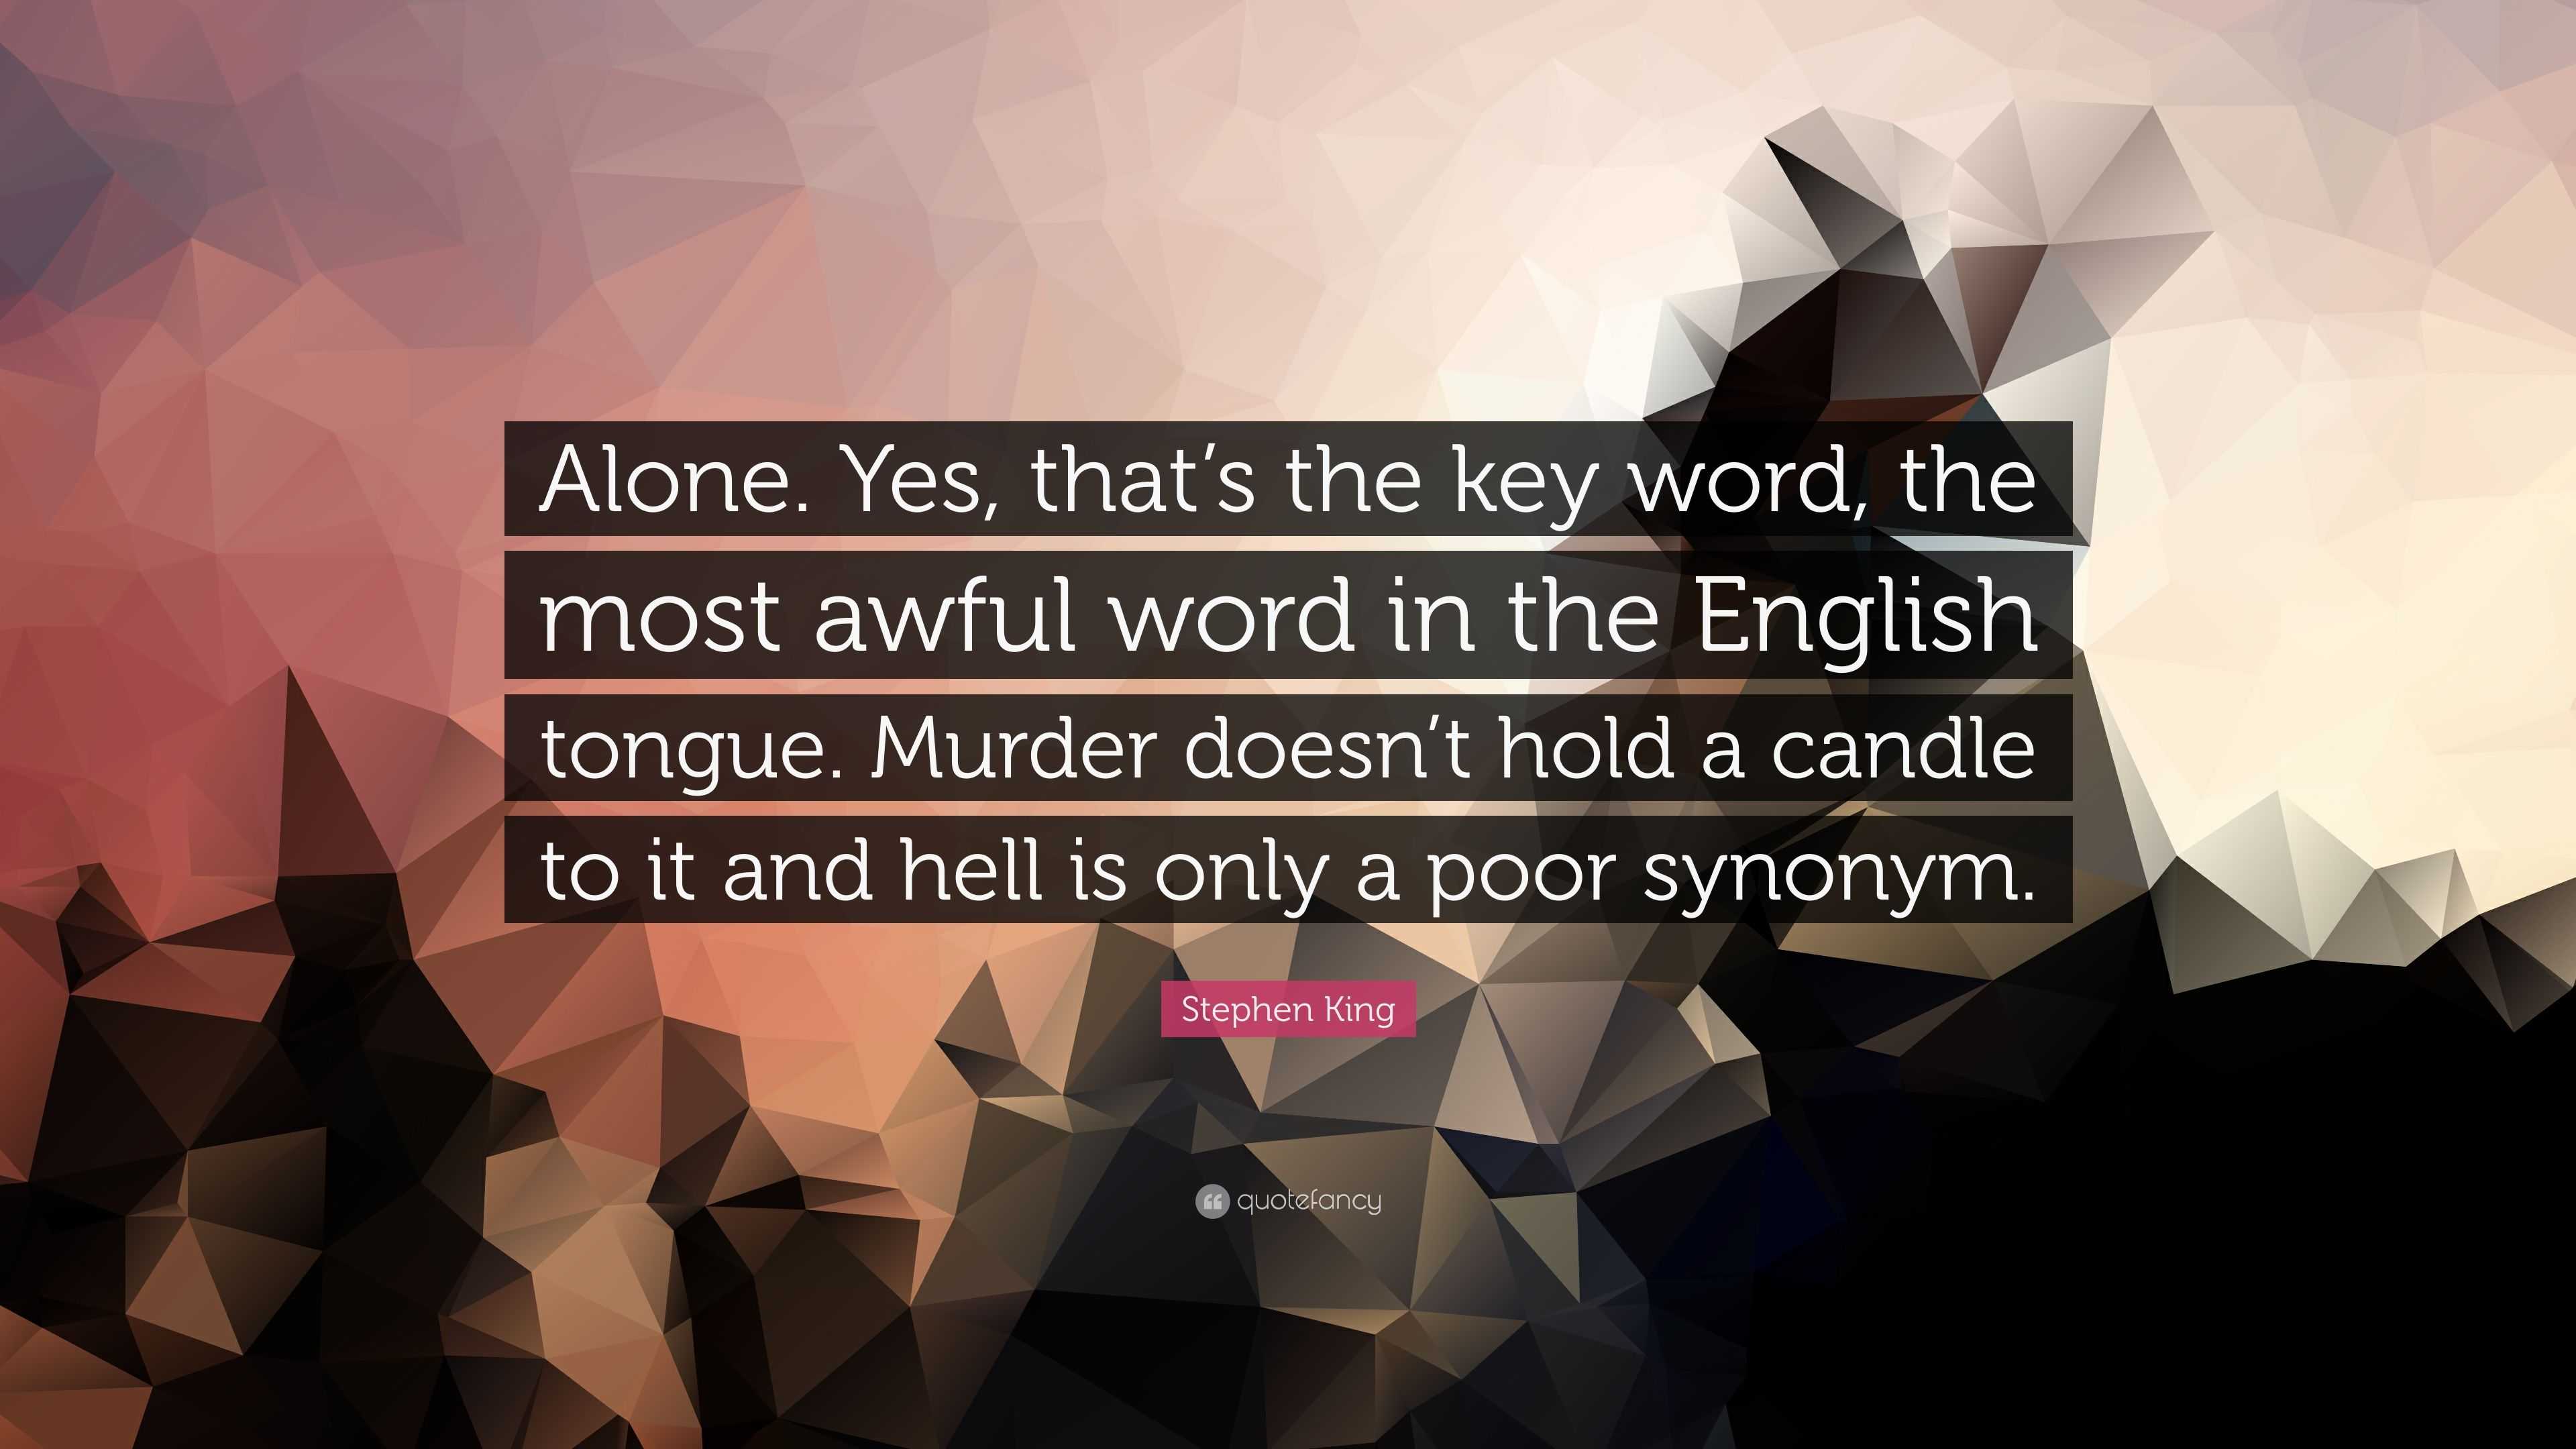 Stephen King Quote: “Alone. Yes, that's the key word, the most